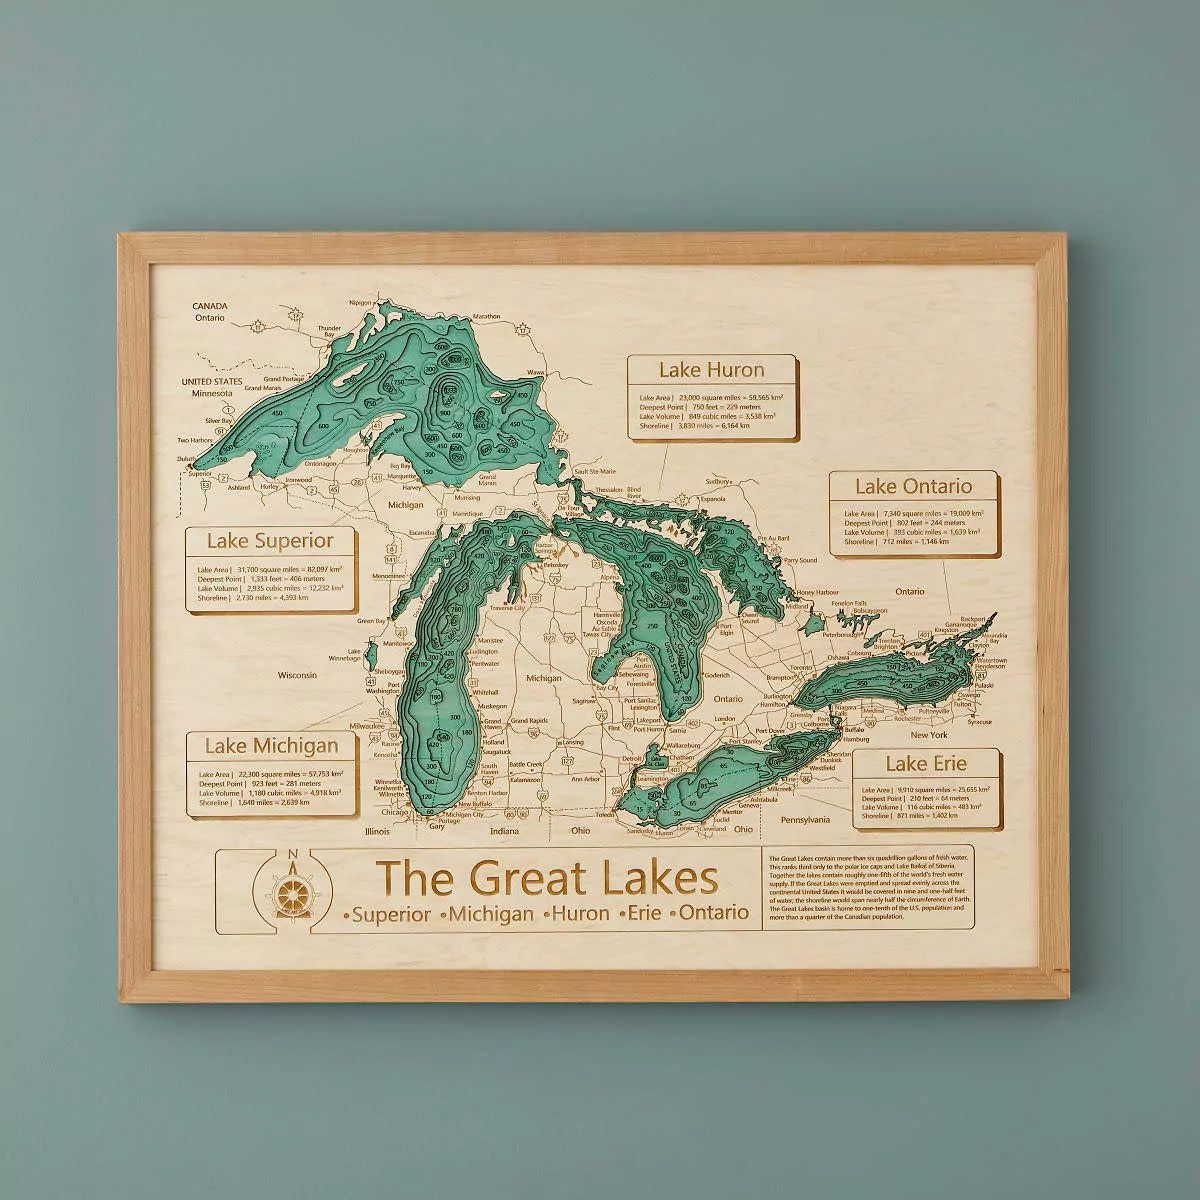 Framed beige and green lake topography art